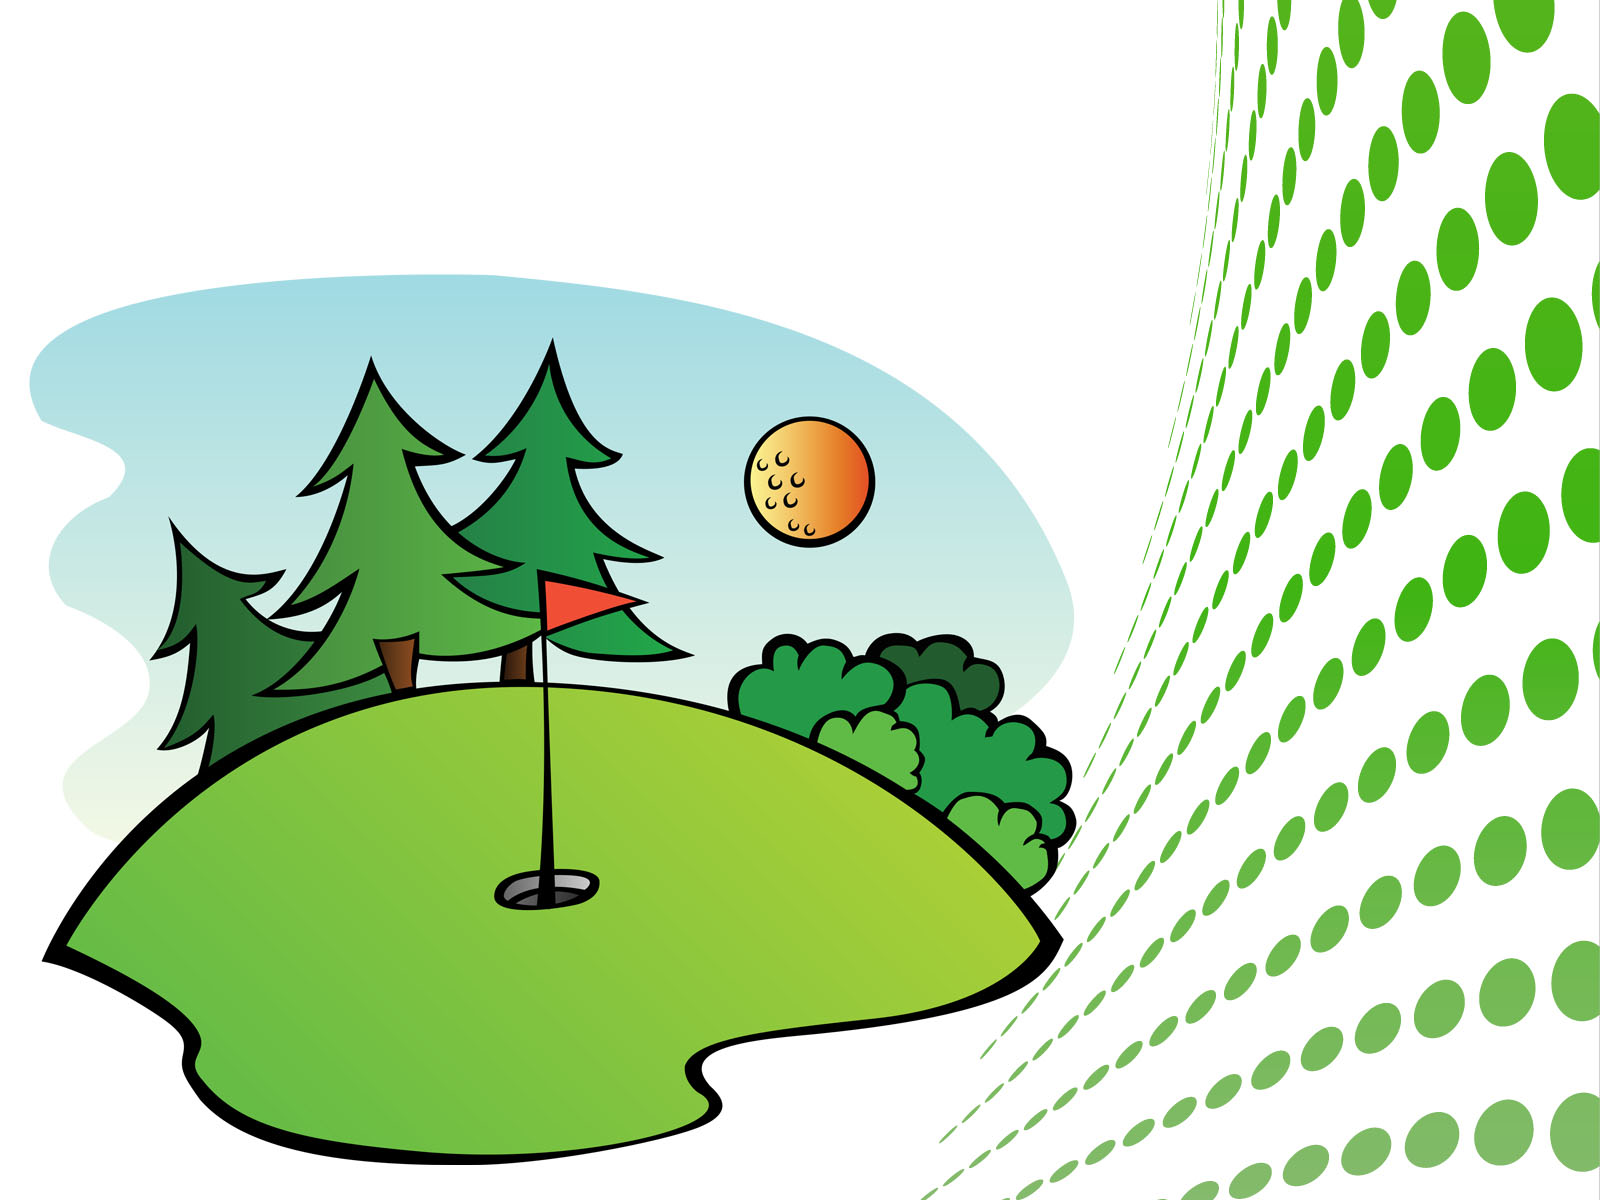 Golf course clip art free vector in open office drawing